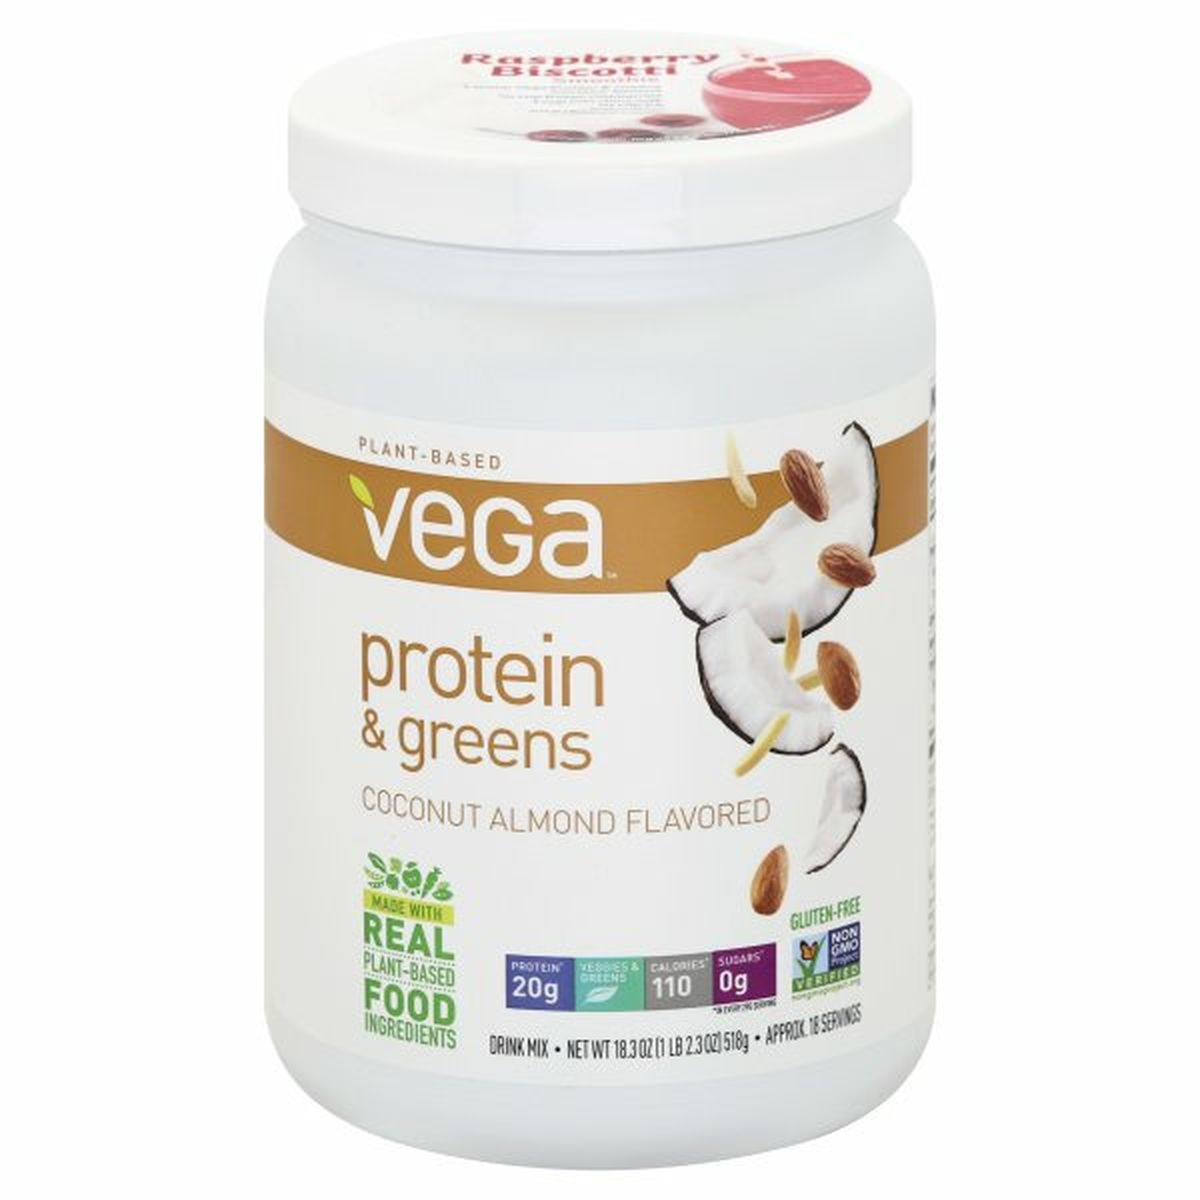 Calories in Vega Protein & Greens, Drink Mix, Coconut Almond Flavored